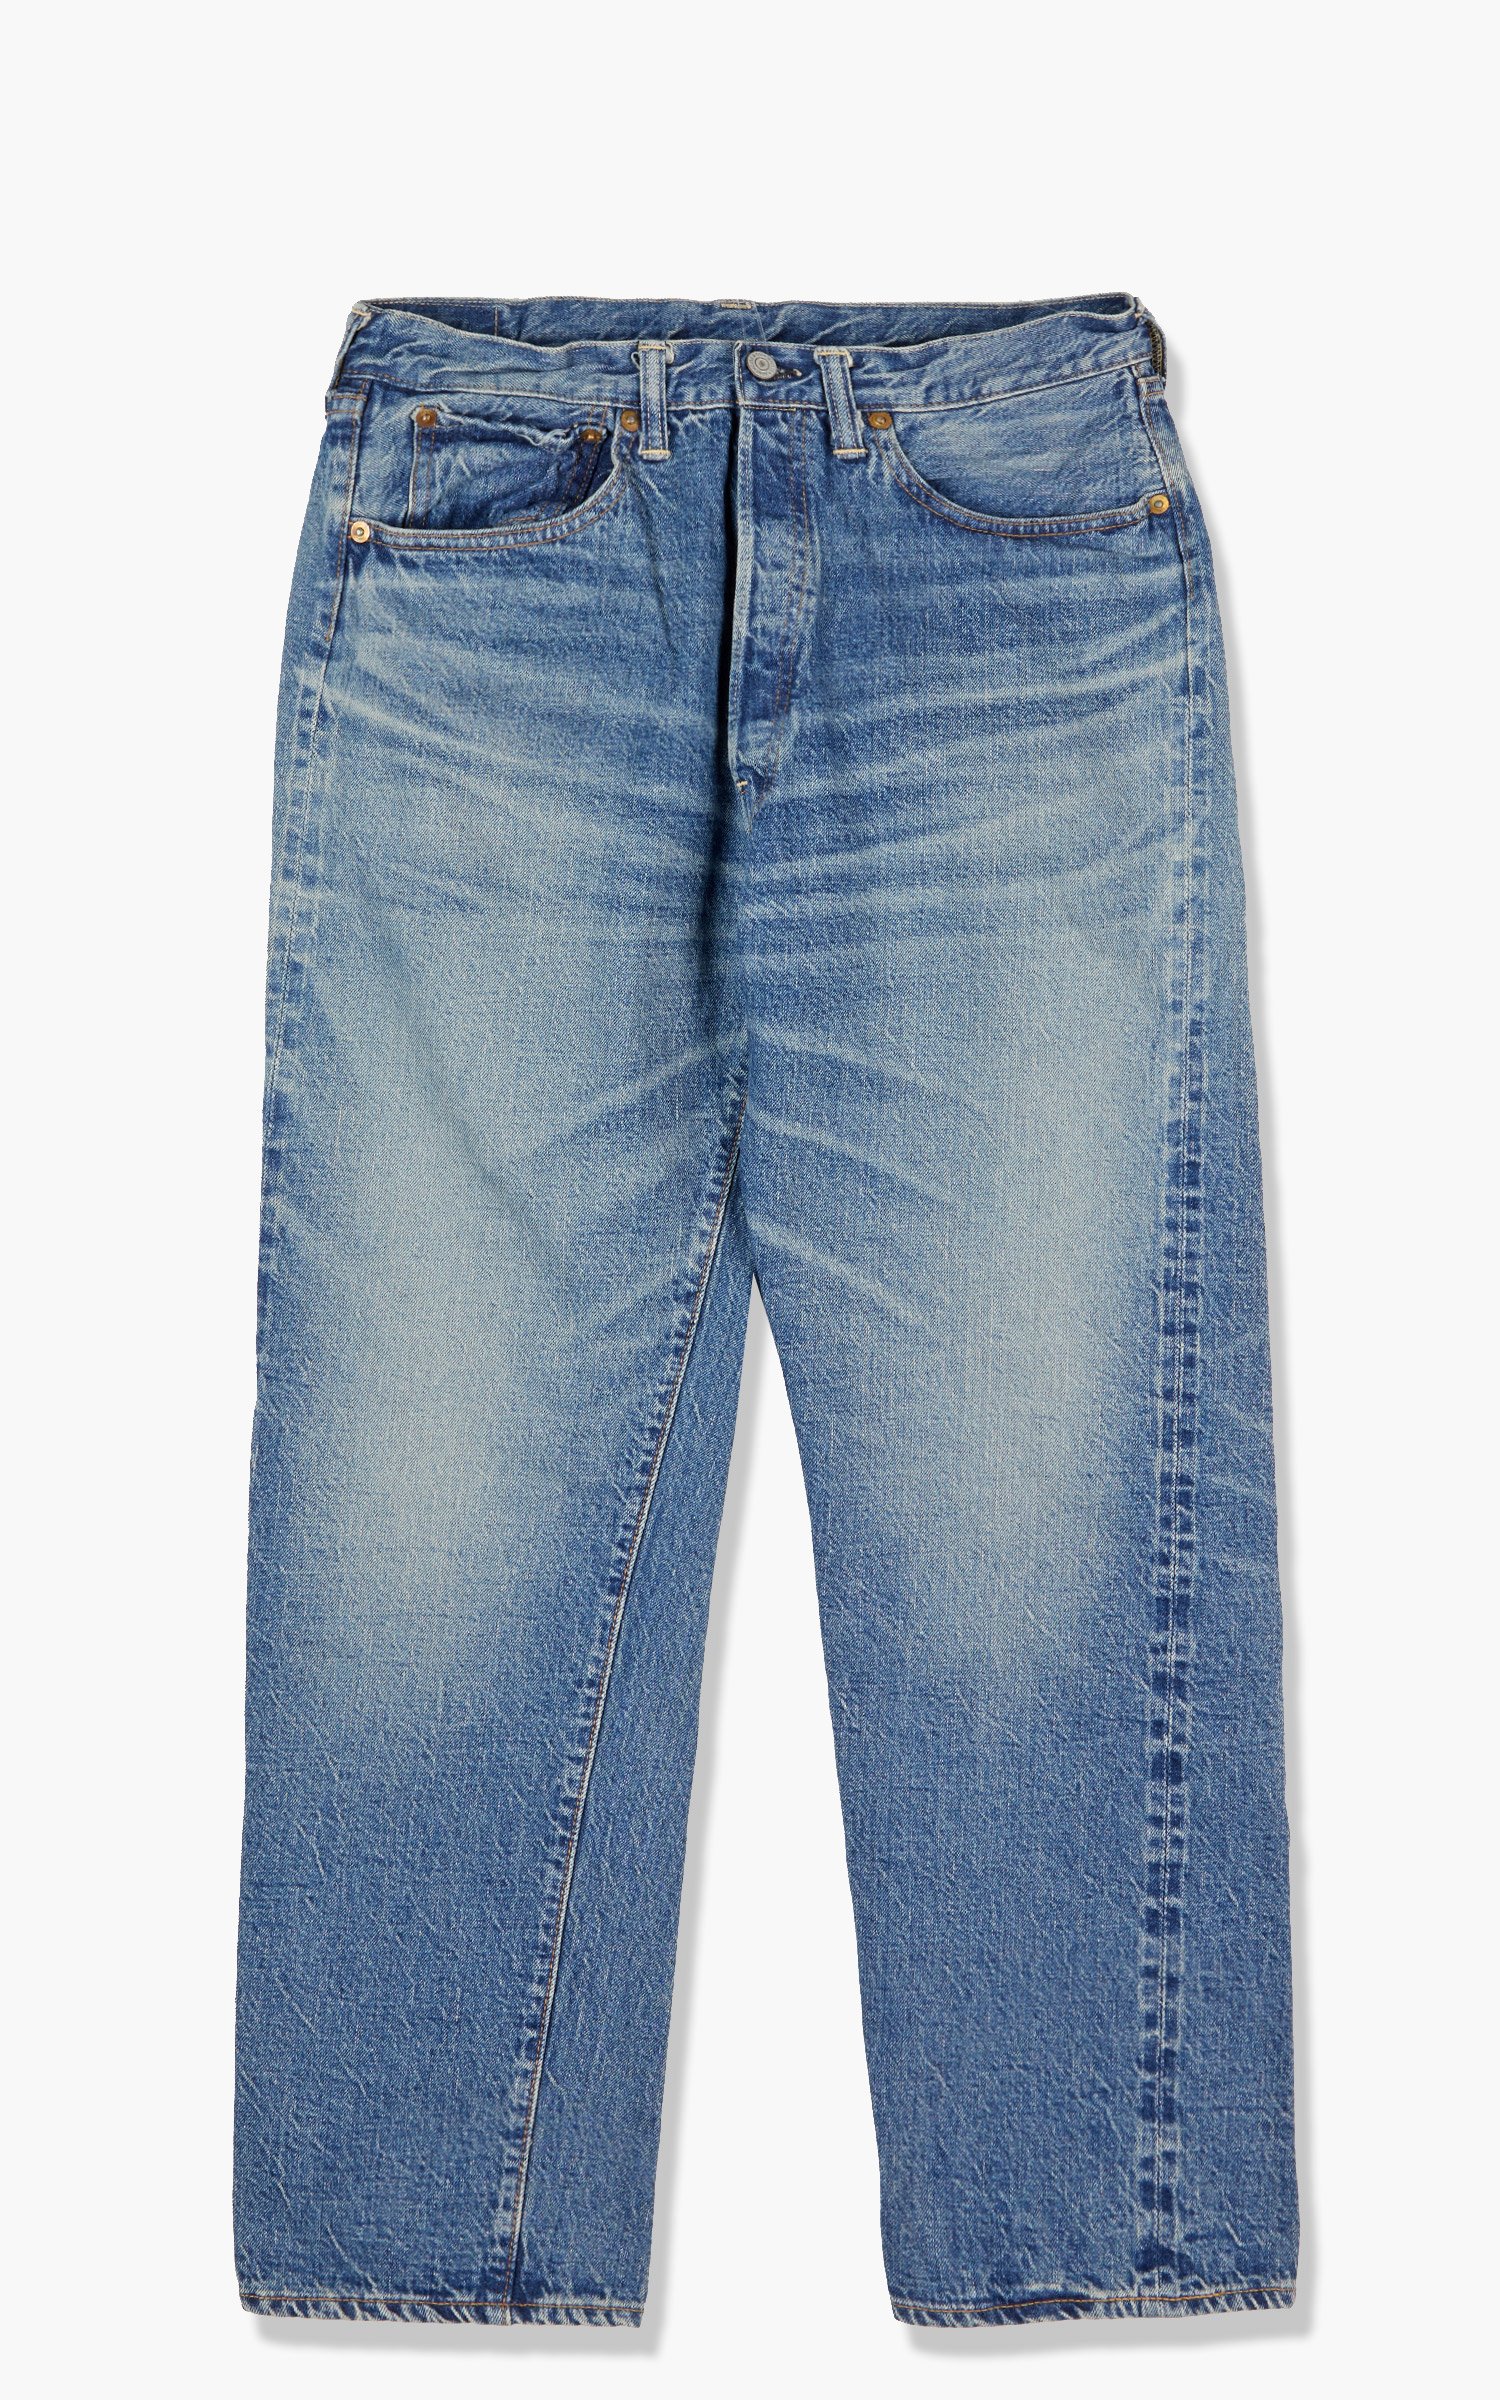 Warehouse & Co. 1101 2nd Hand Loose Straight Jeans Used Wash | Cultizm